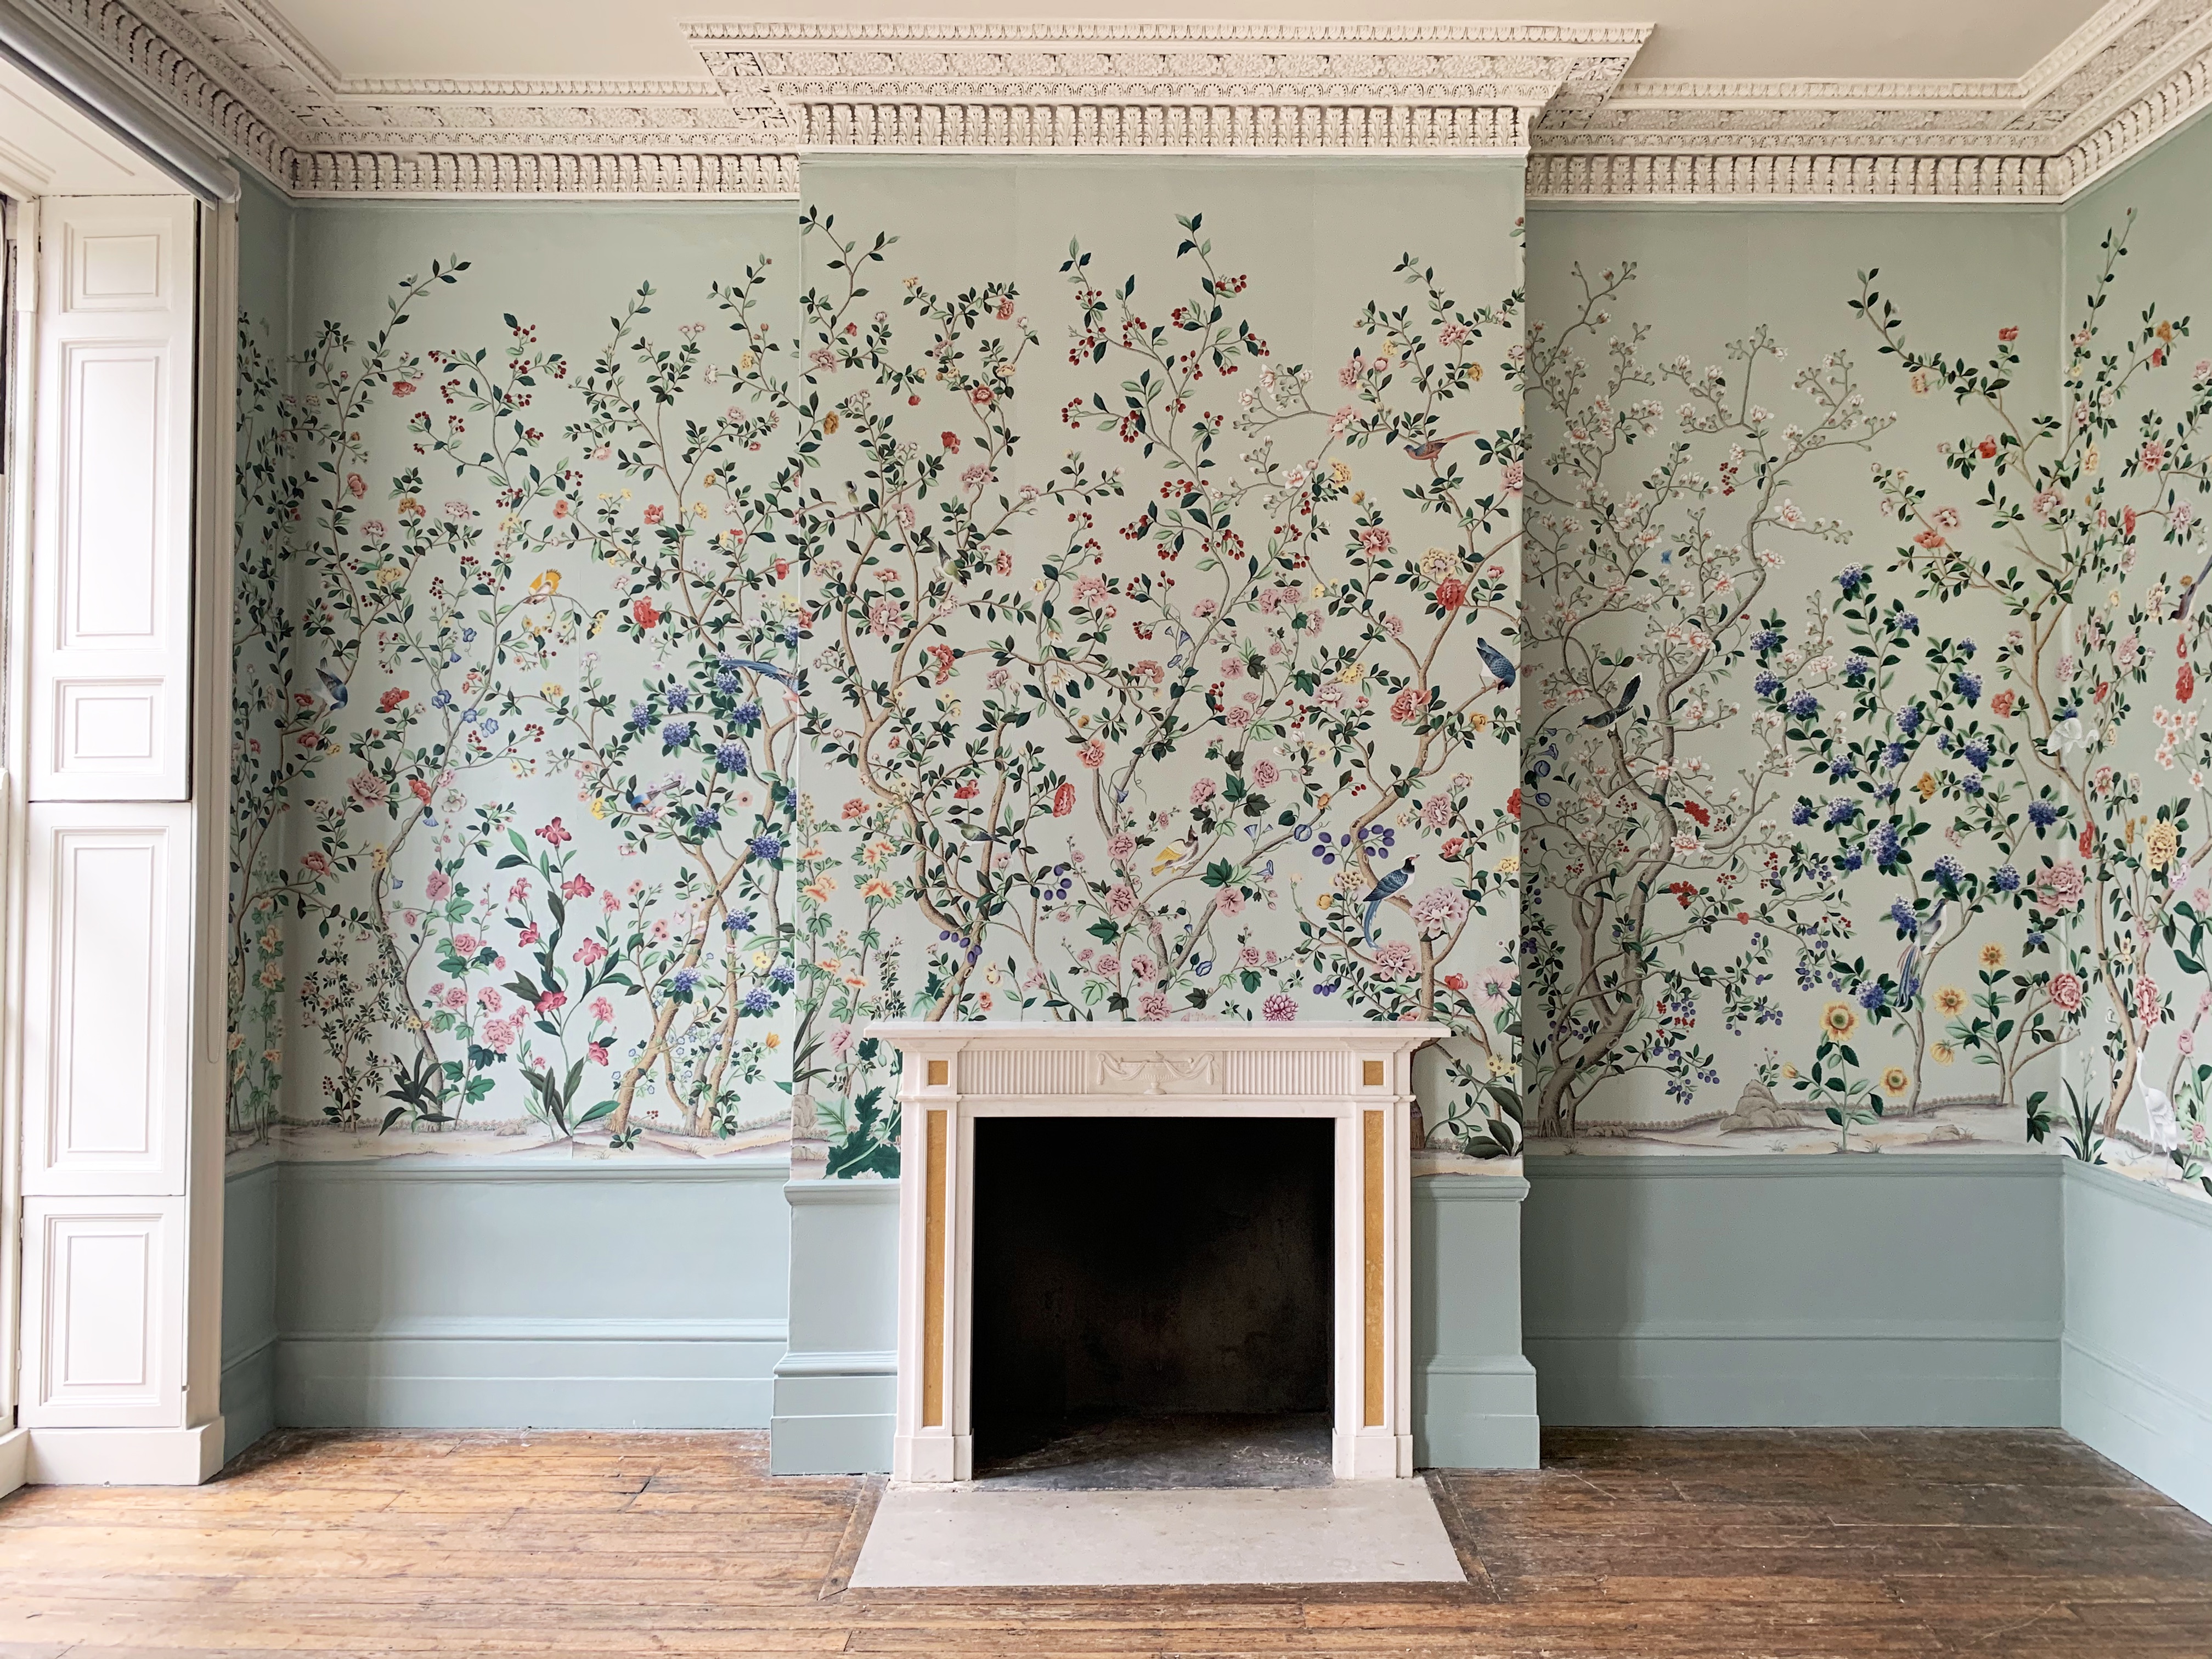 "Erdem" on Adam Grey dyed silk, a collaboration between de Gournay and fashion designer Erdem Moralioglu. The capsule collection depicts sparrows, warblers, pheasants, and egrets among hydrangeas, hollyhocks, irises, chrysanthemums, and morning glories.